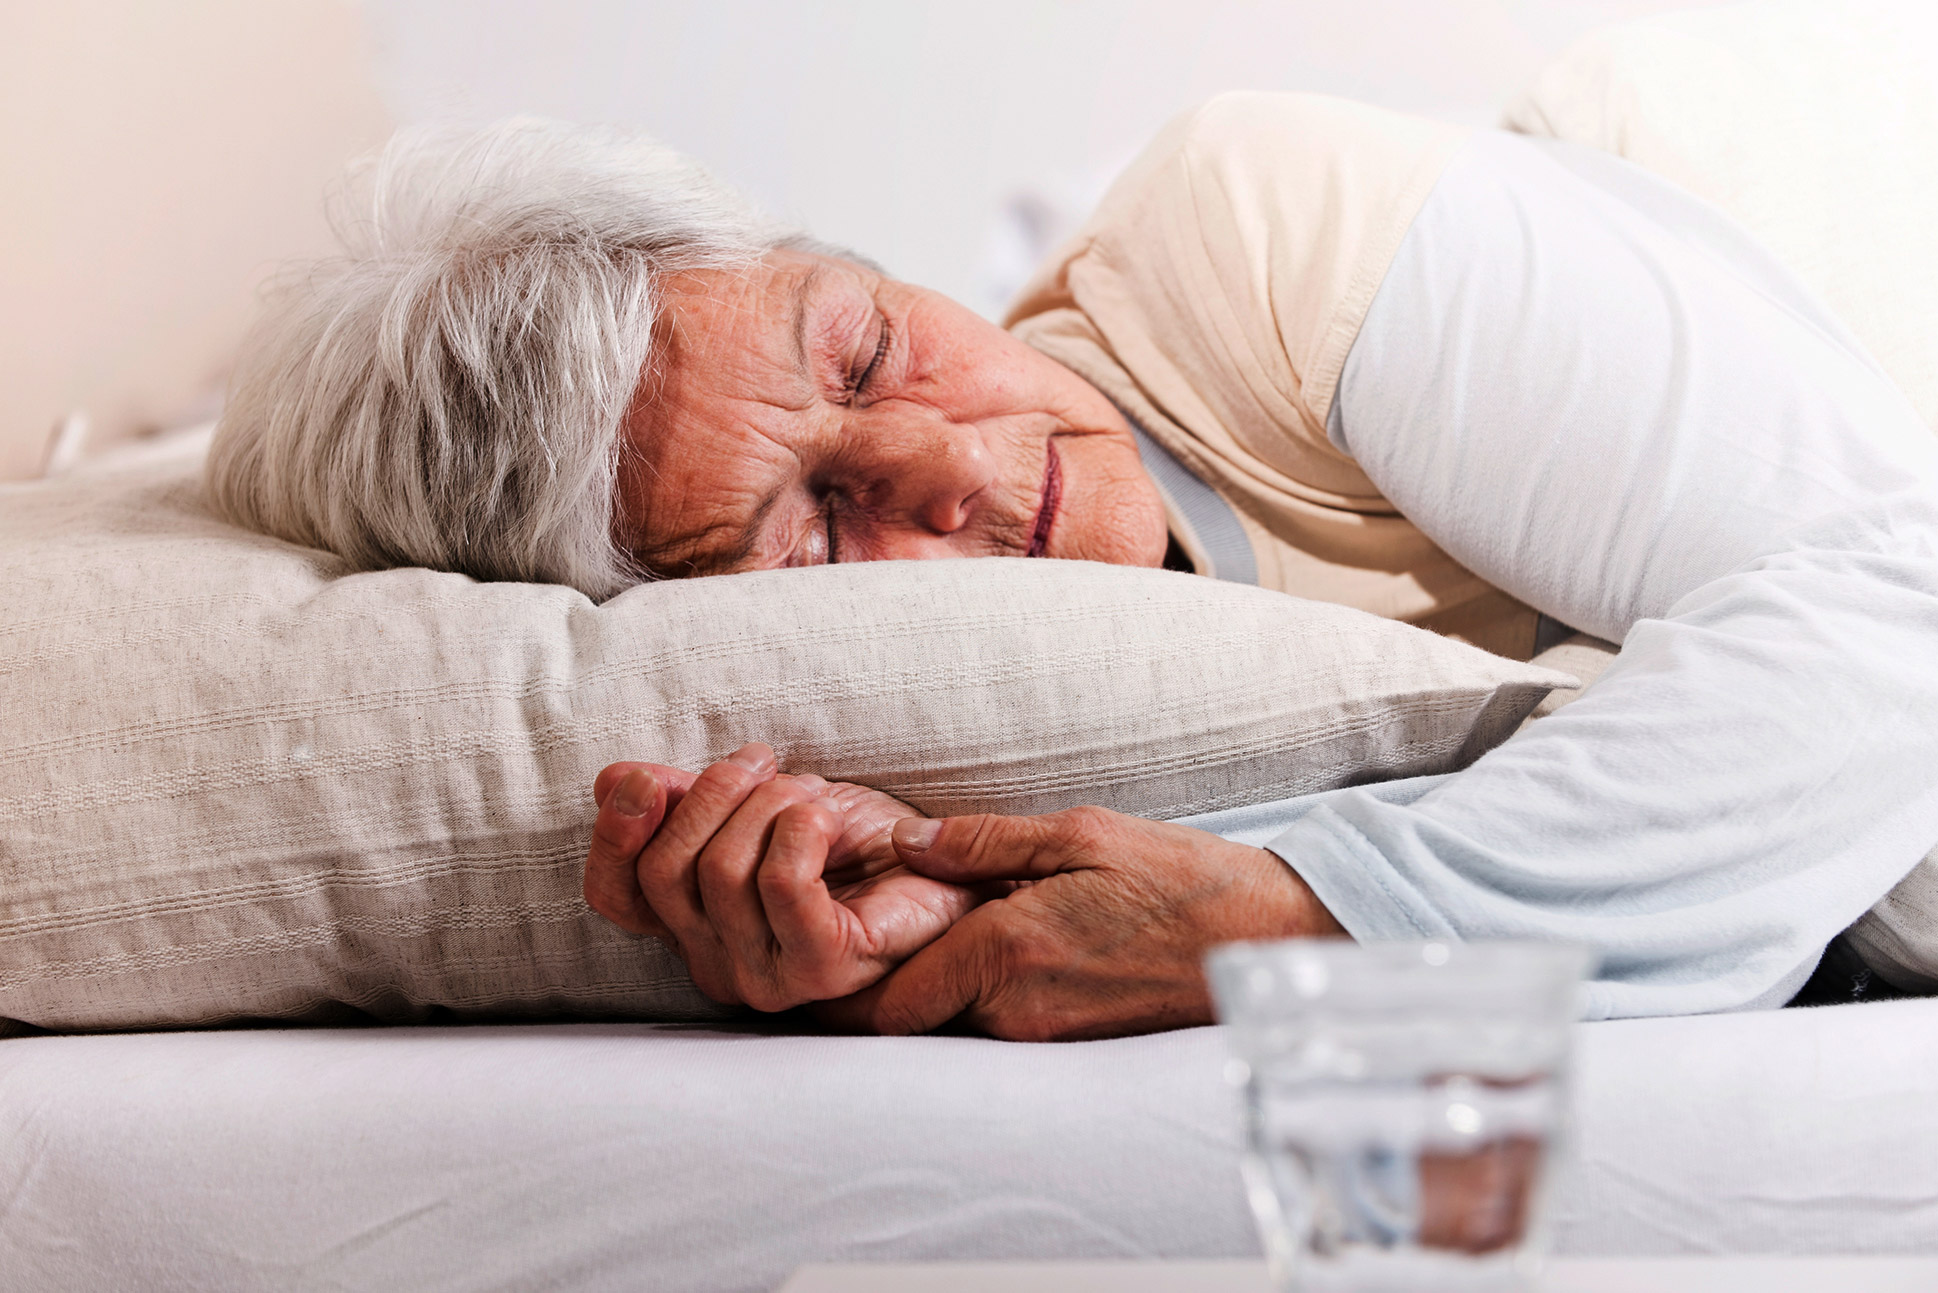 Can Some Sleep Medications Raise The Risk Of Alzheimers Disease Cognitive Vitality